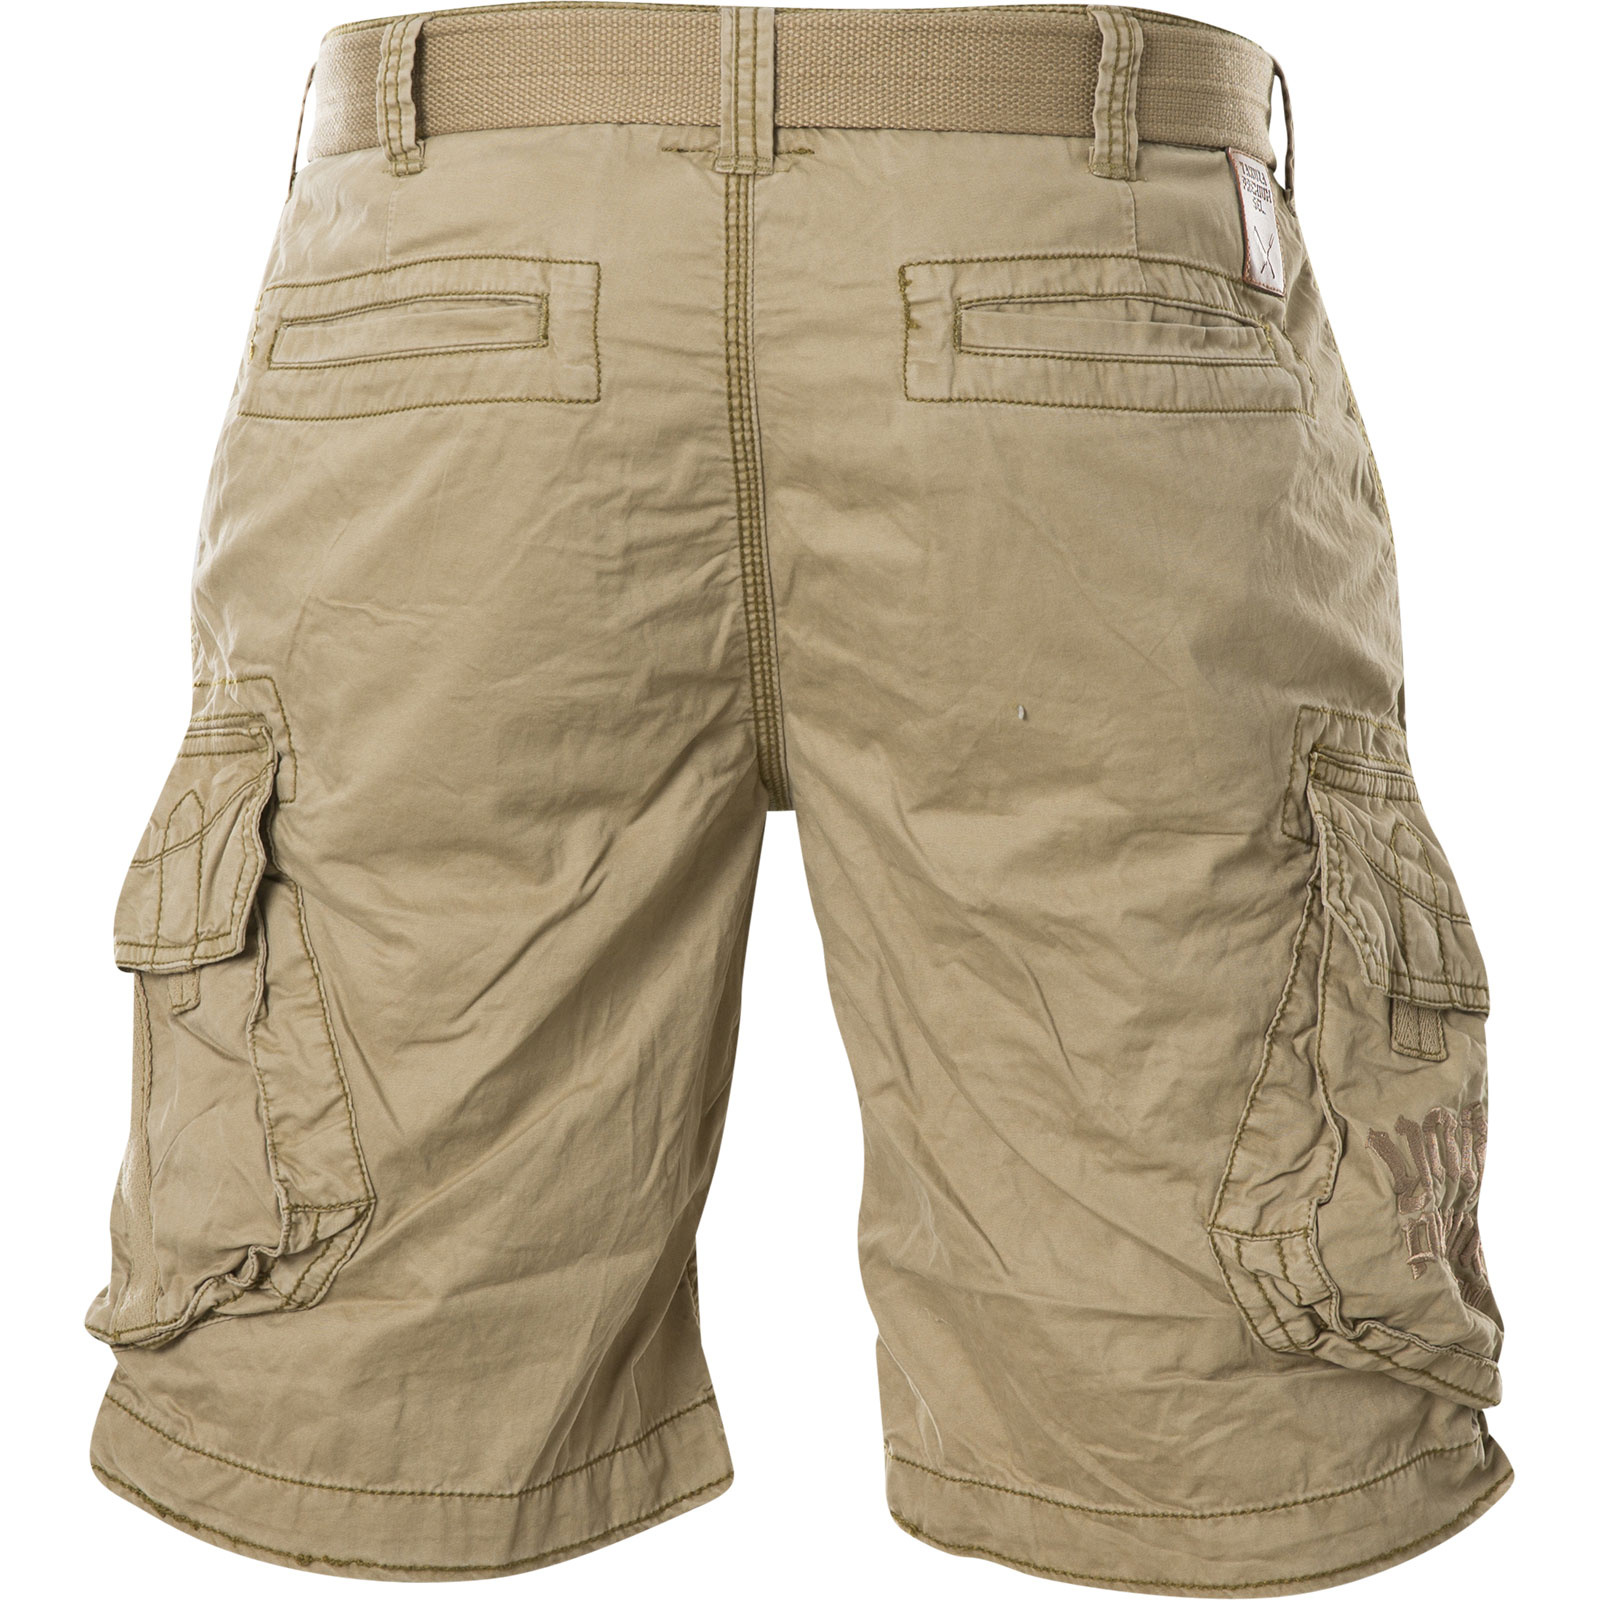 Yakuza Premium Shorts YPSH-2261 in Sand with detailed embroidery